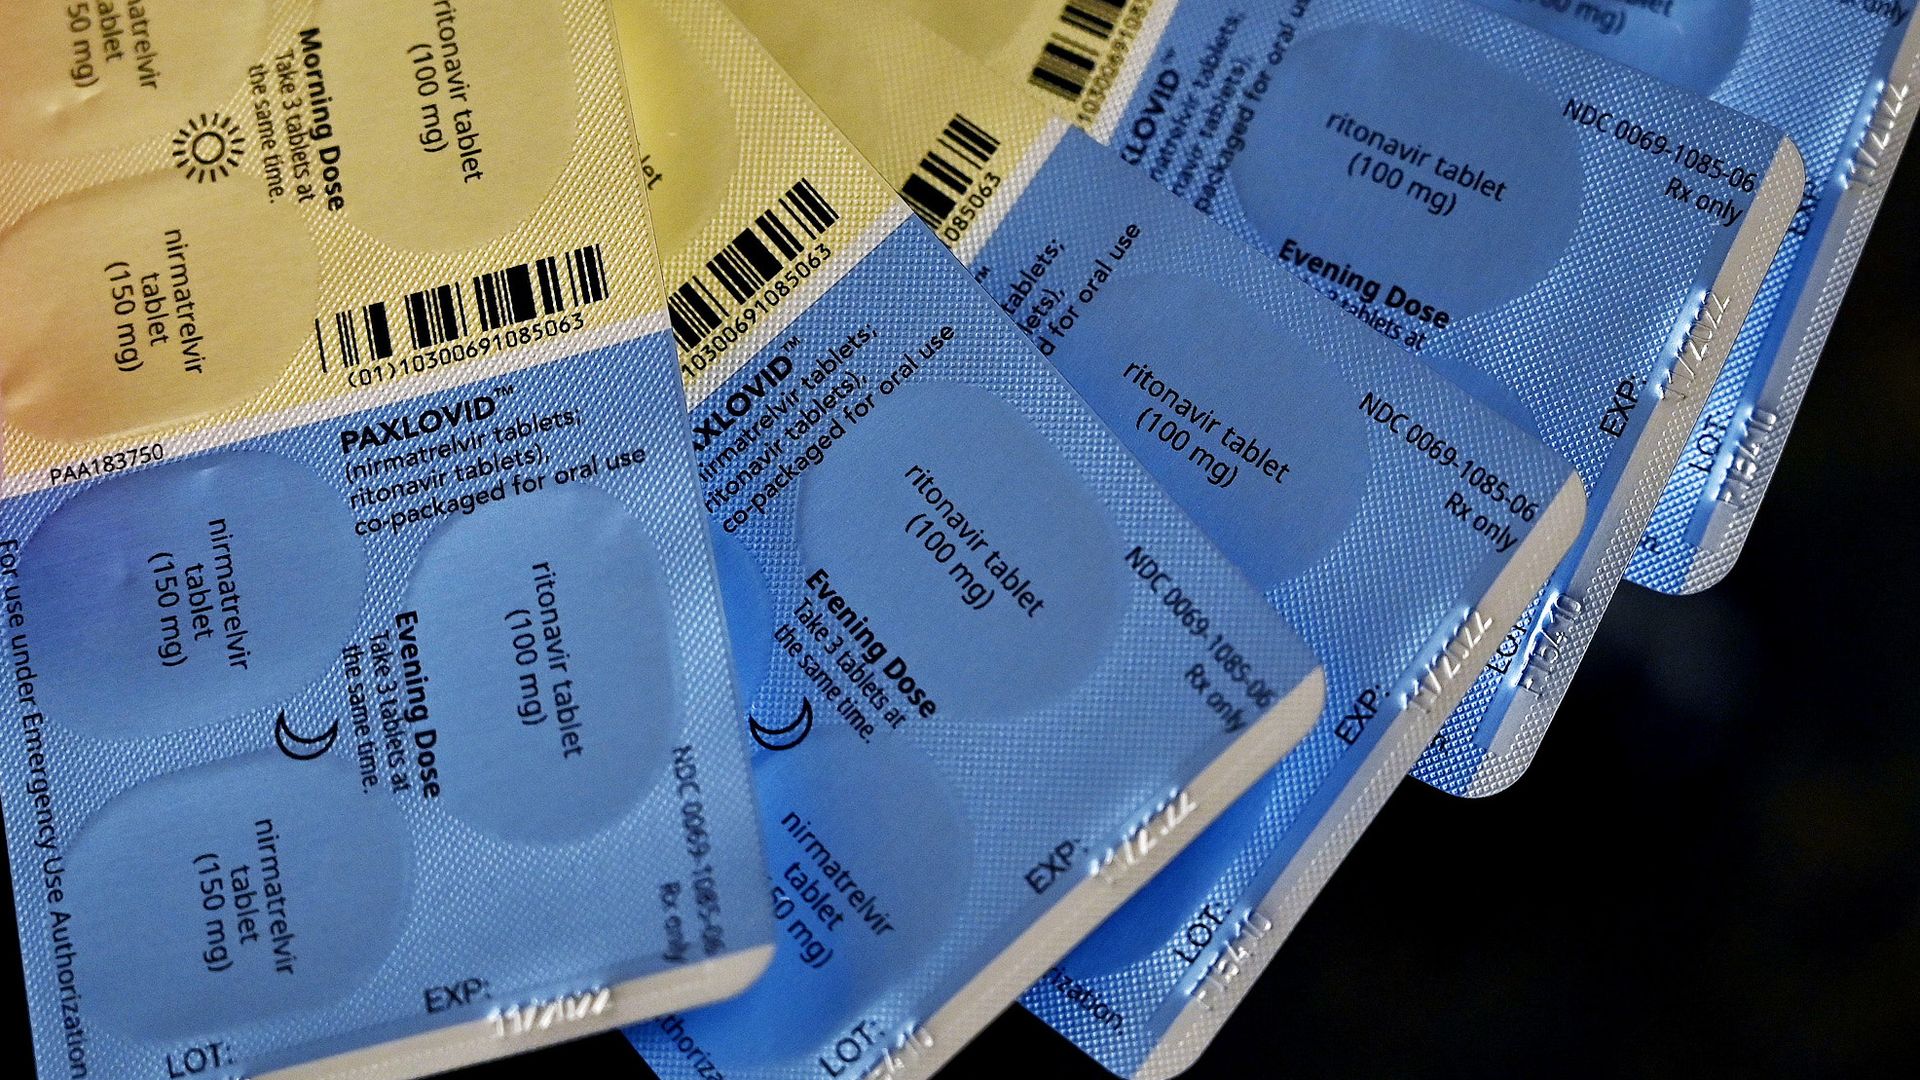 Packages of Paxlovid, Pfizer's COVID-19 pill.